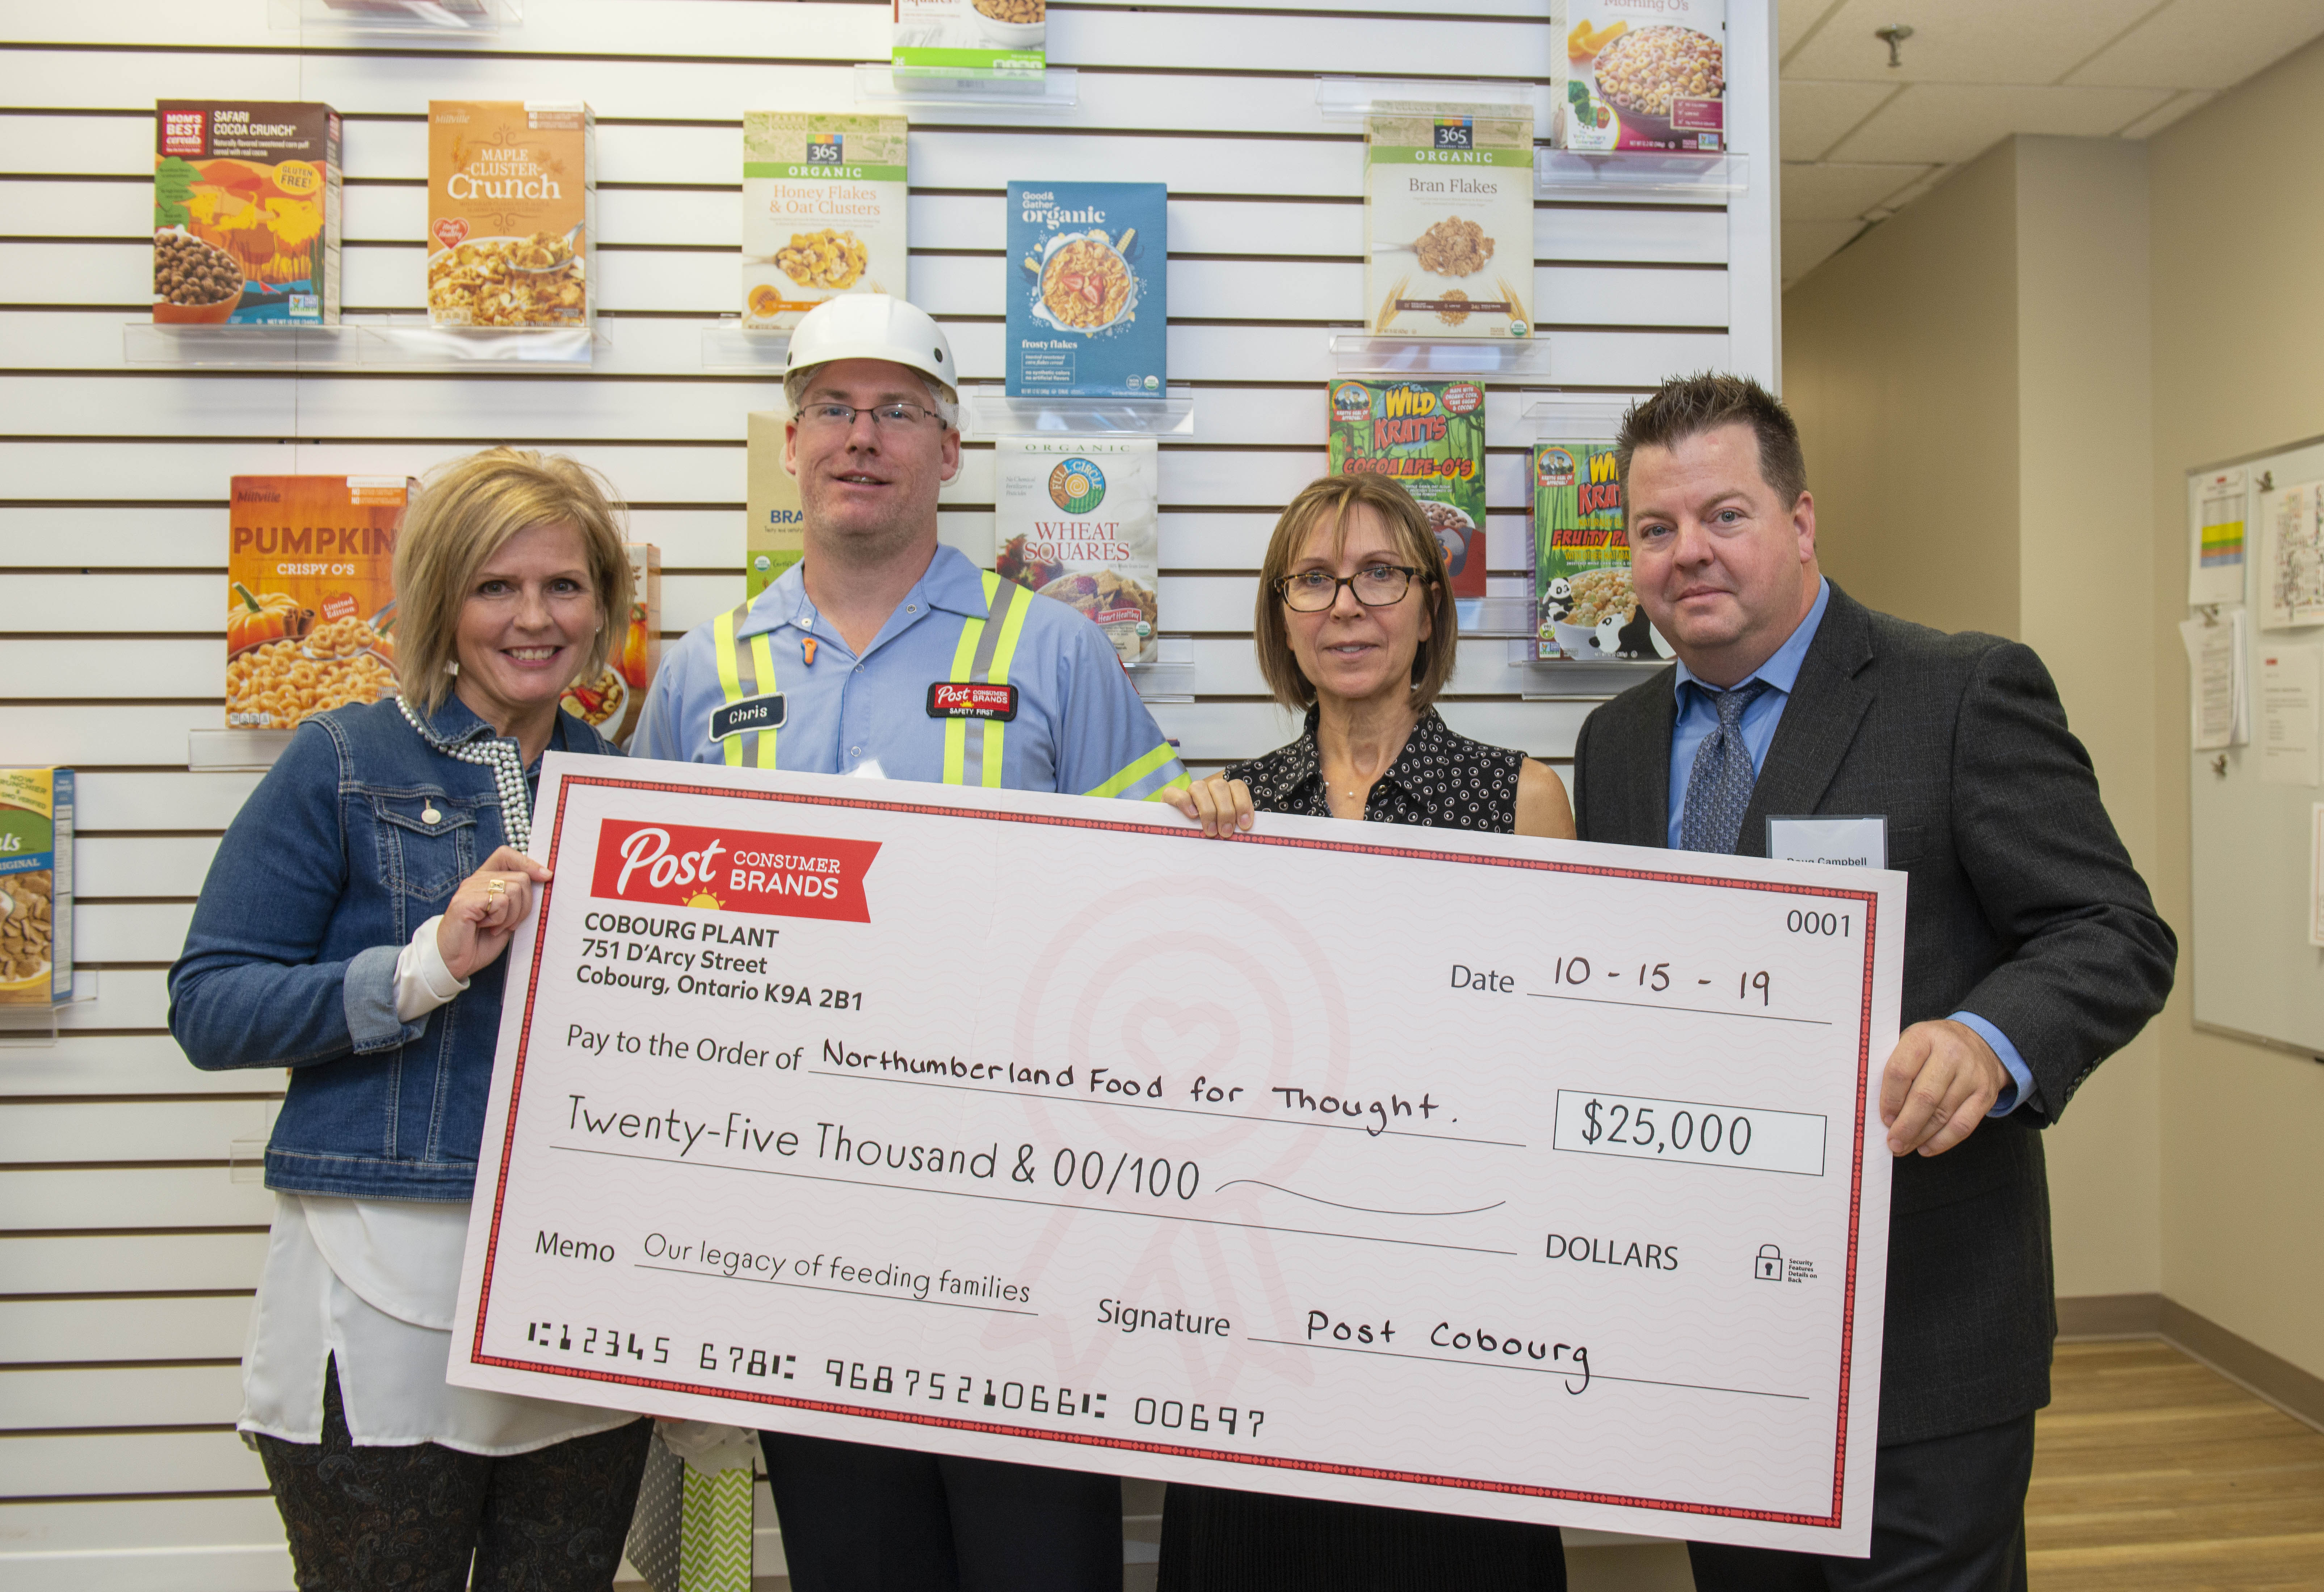 Four people standing with over-sized donation check